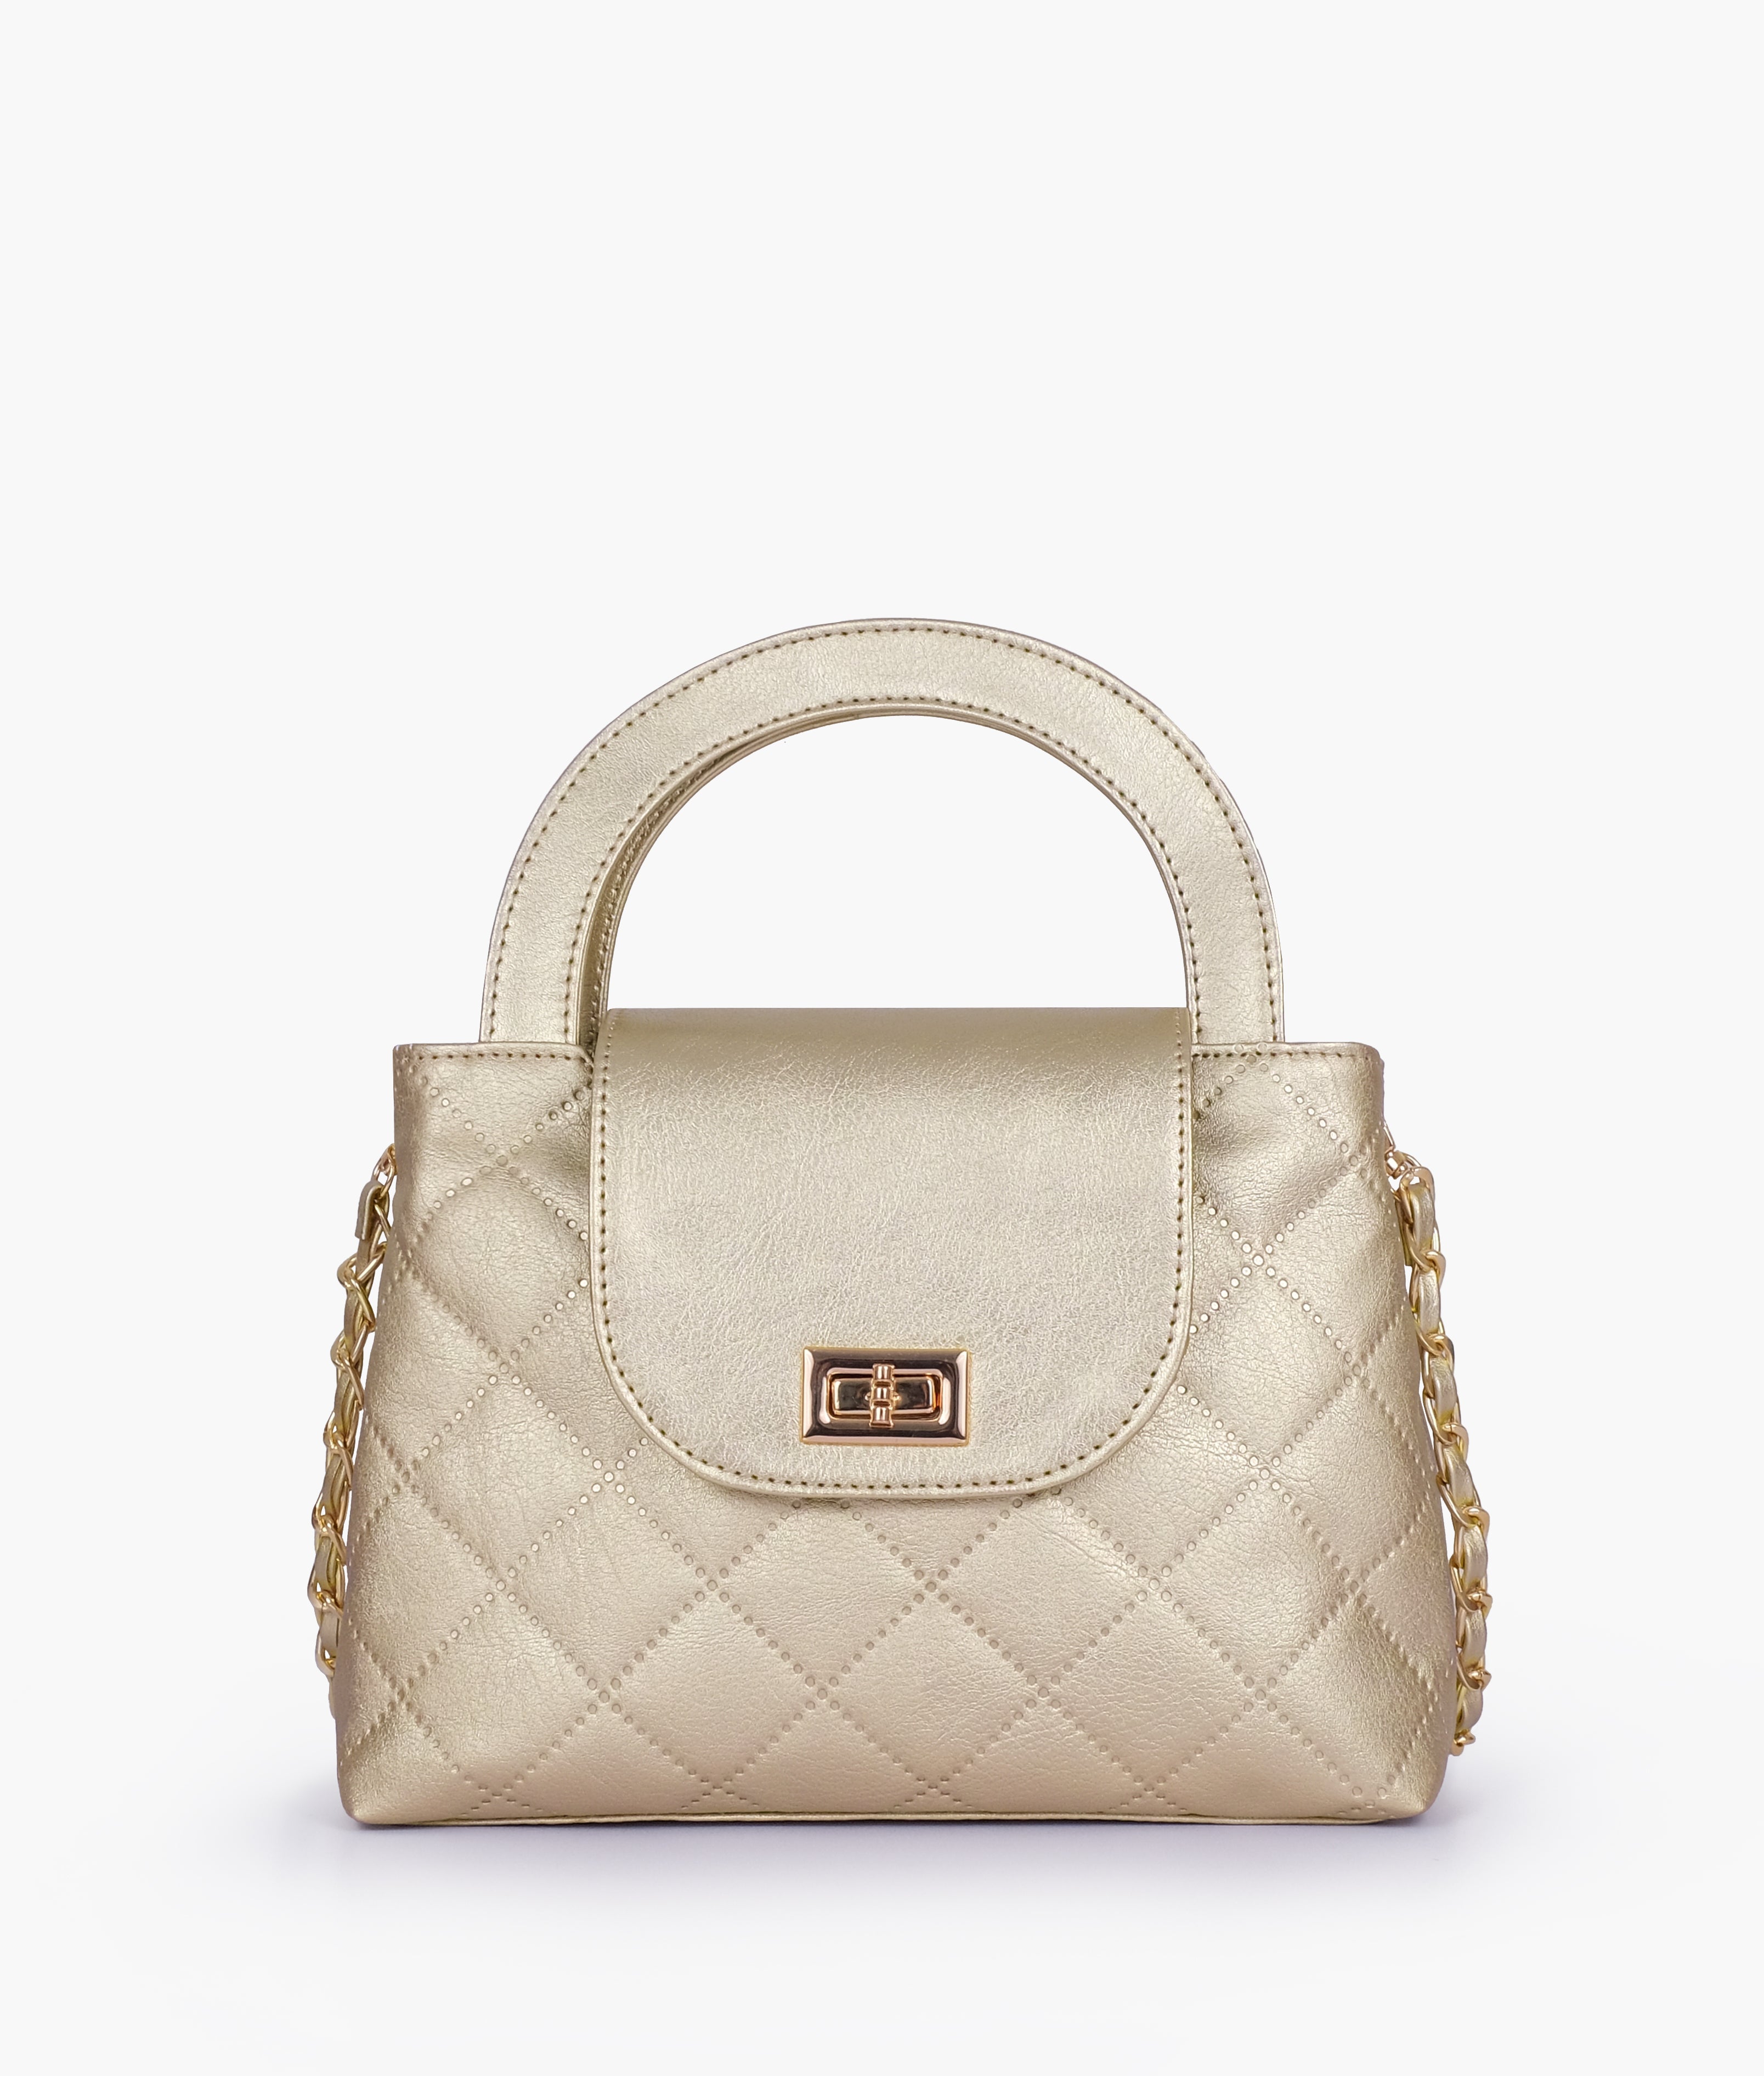 Golden flap quilted bag with top handle